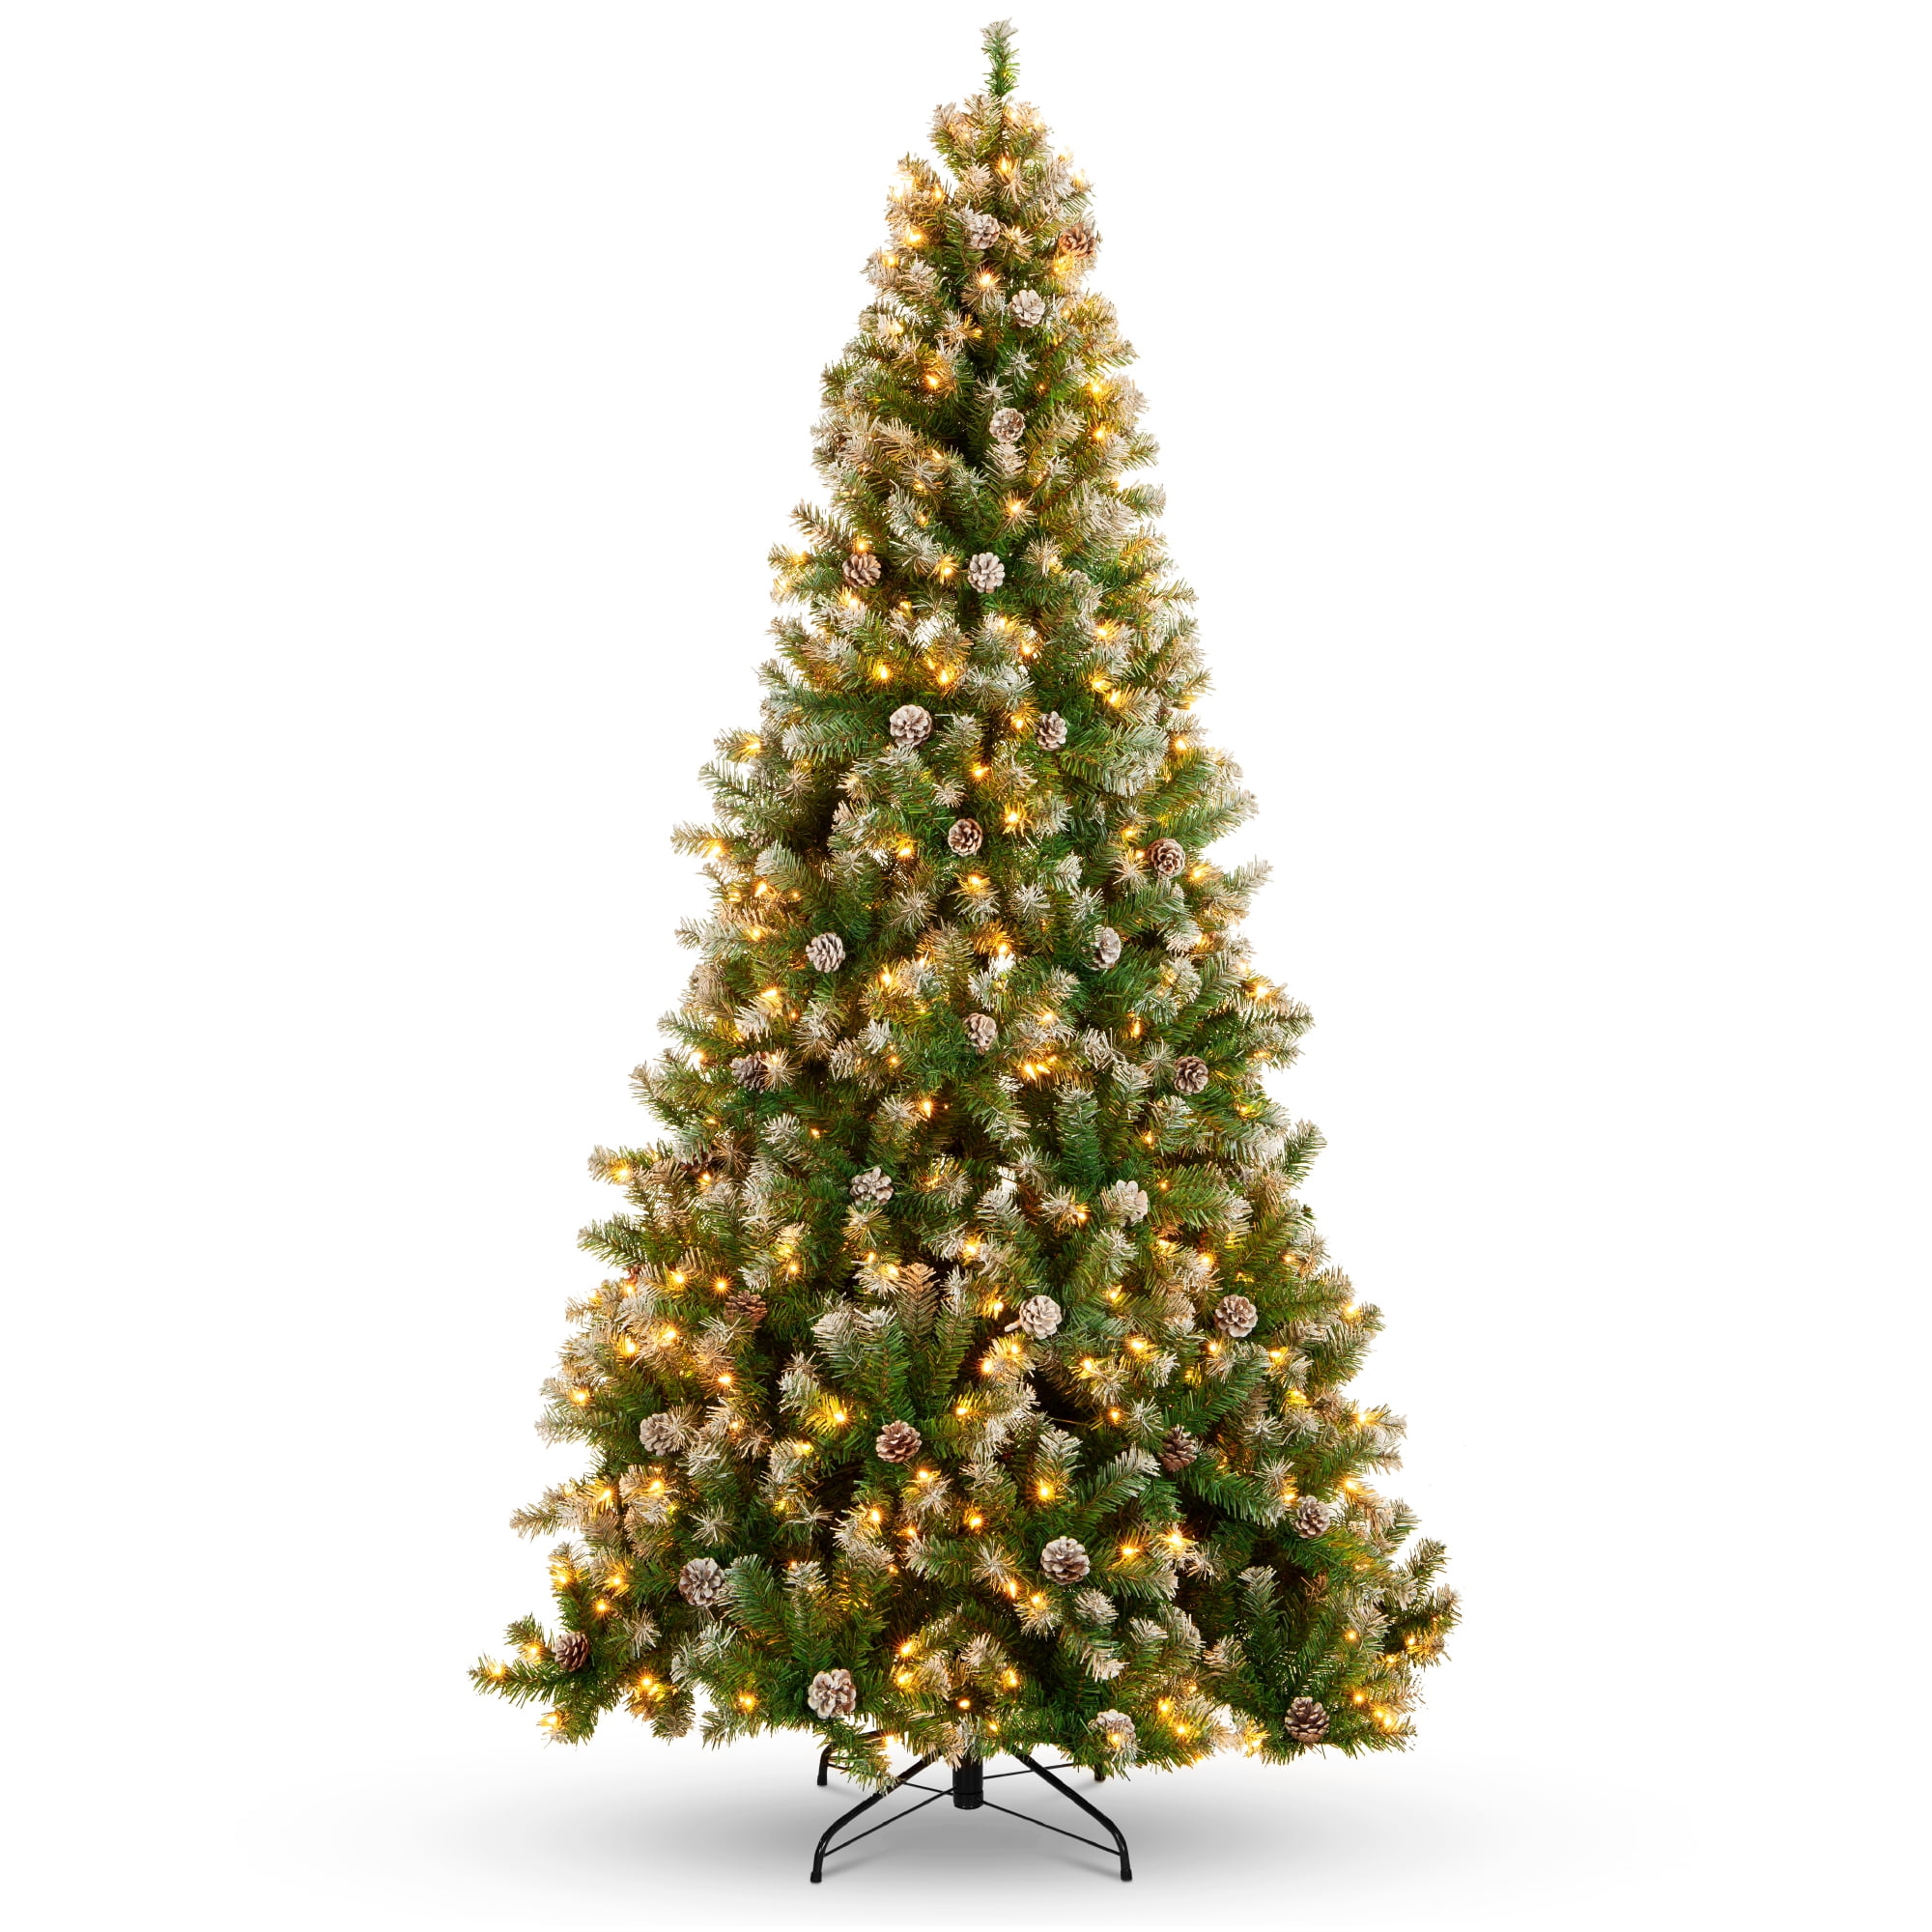 4FT 5FT 6FT 7FT 8FT Gold Christmas Trees Undecorated Holiday Festival Xmas Tree 